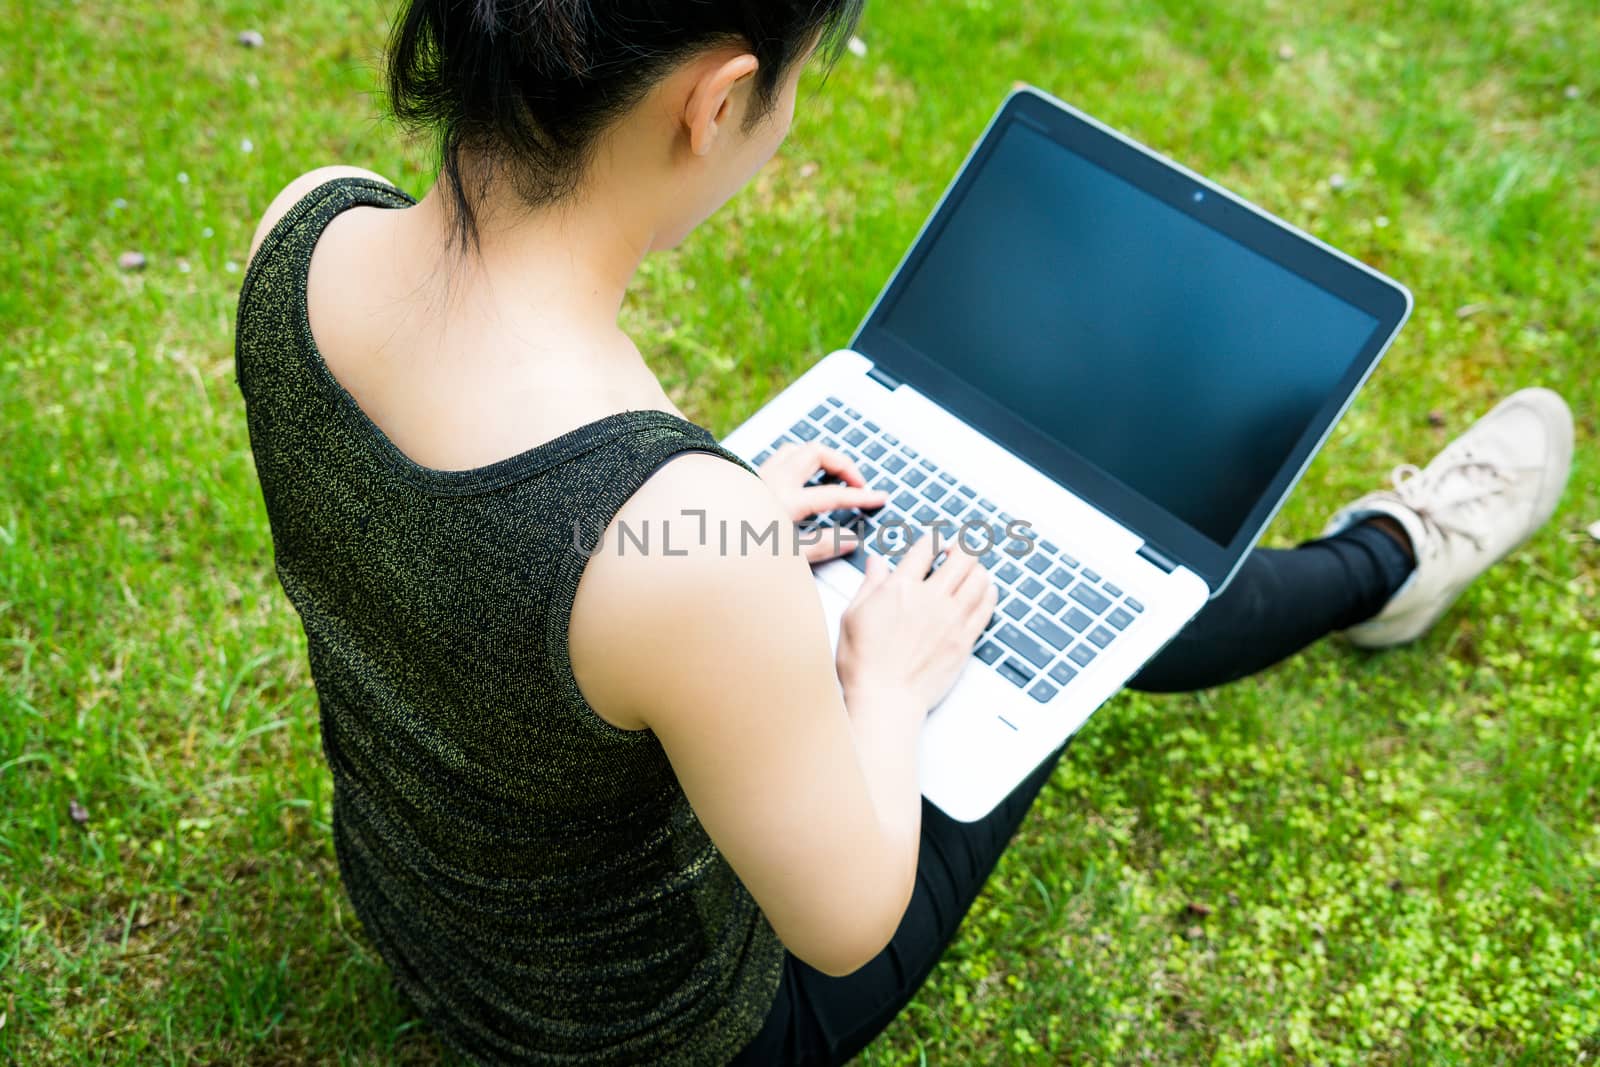 A woman is sitting on the grass while using laptop computer by psodaz